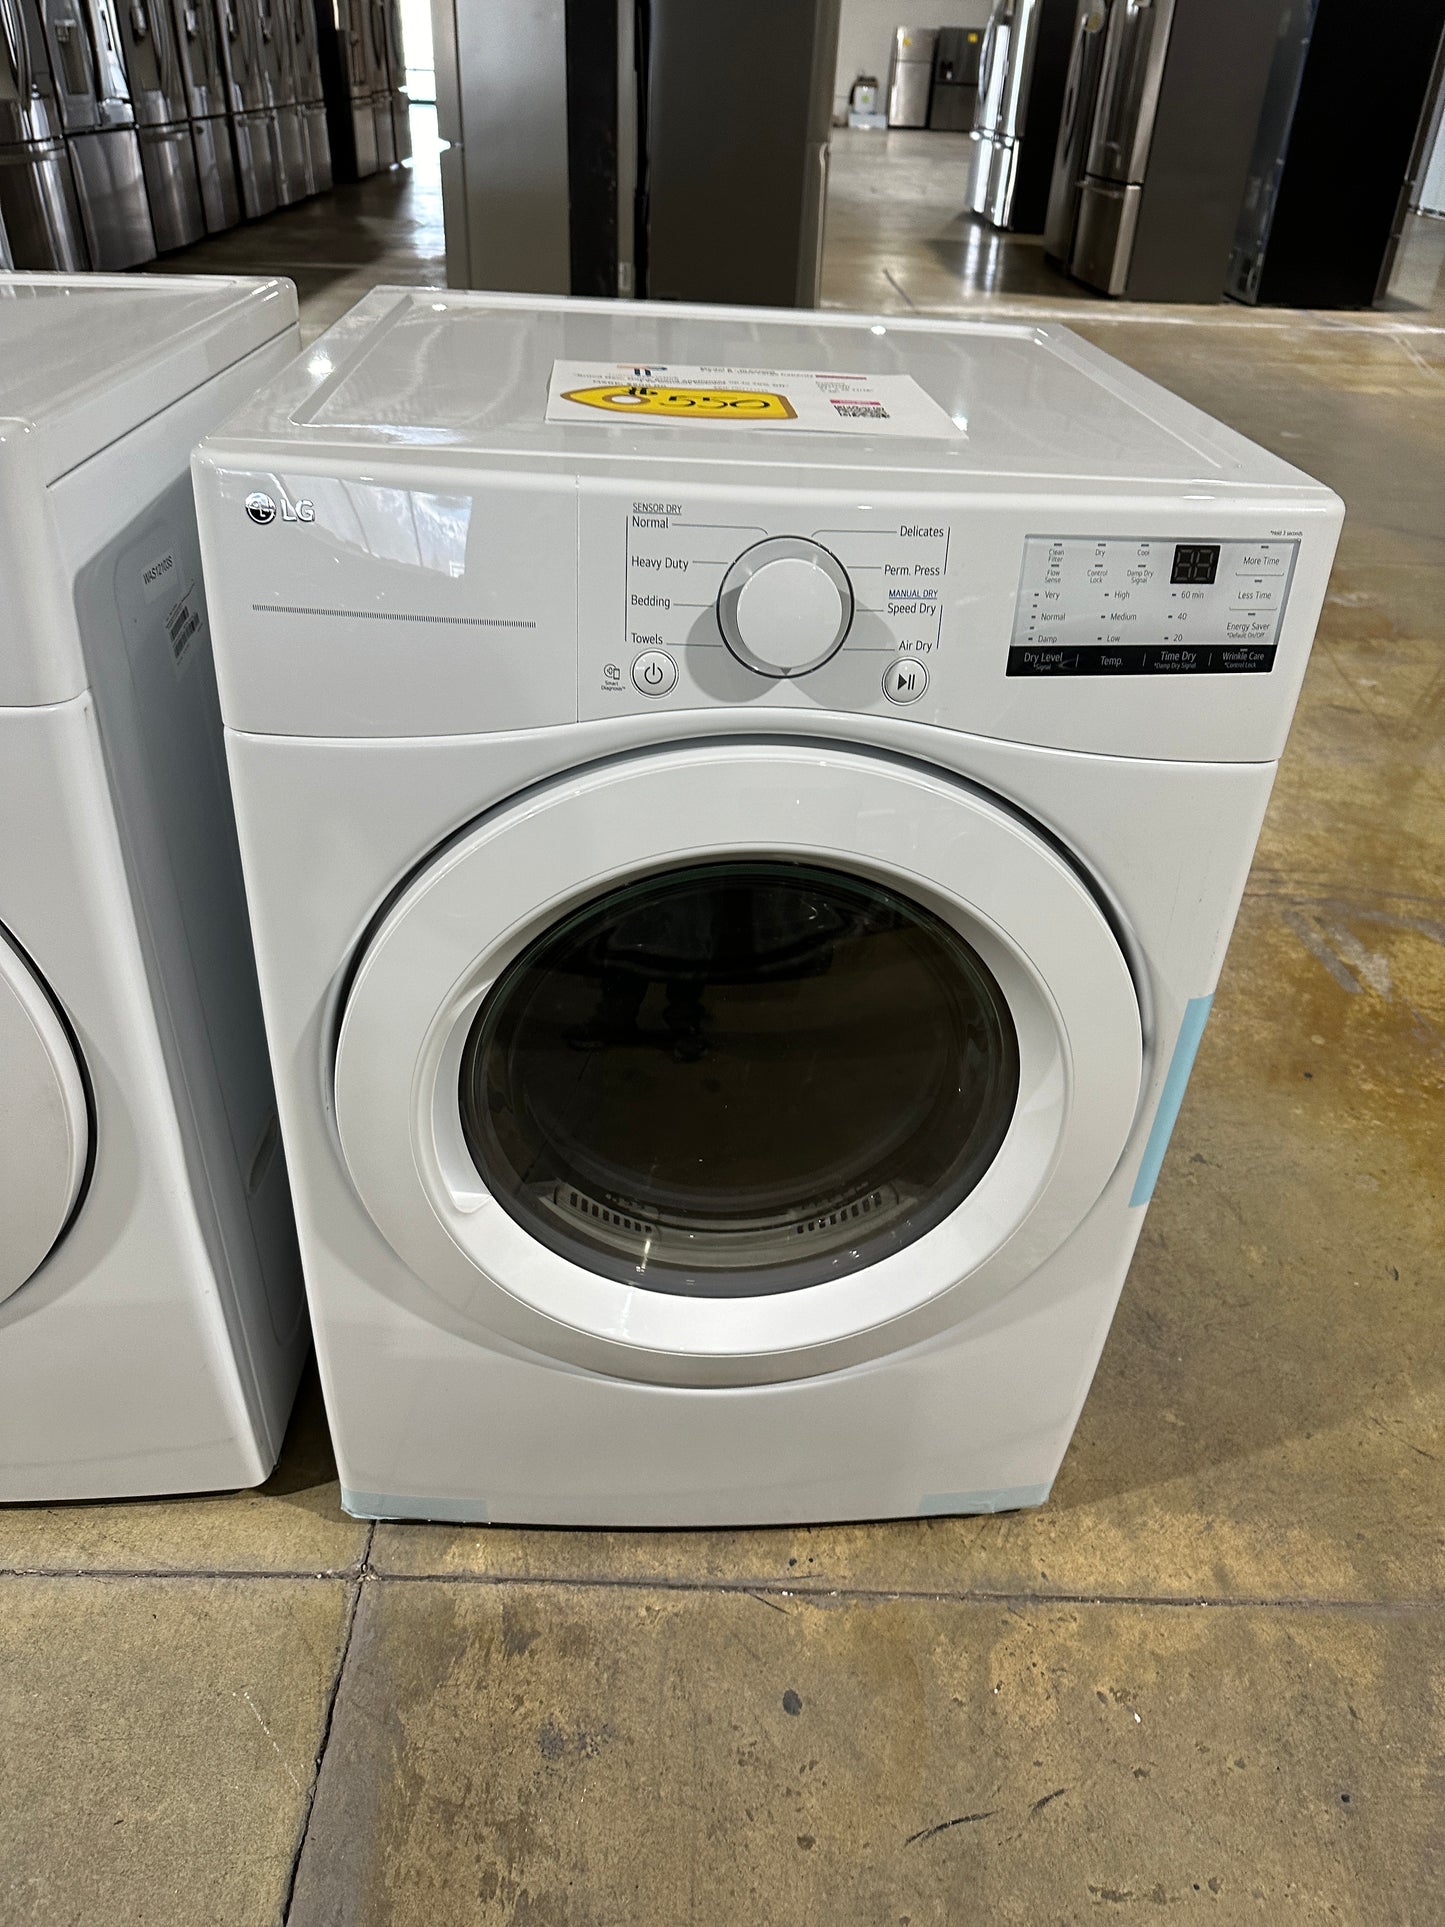 GREAT NEW LG STACKABLE ELECTRIC DRYER MODEL: DLE3400W DRY12124S